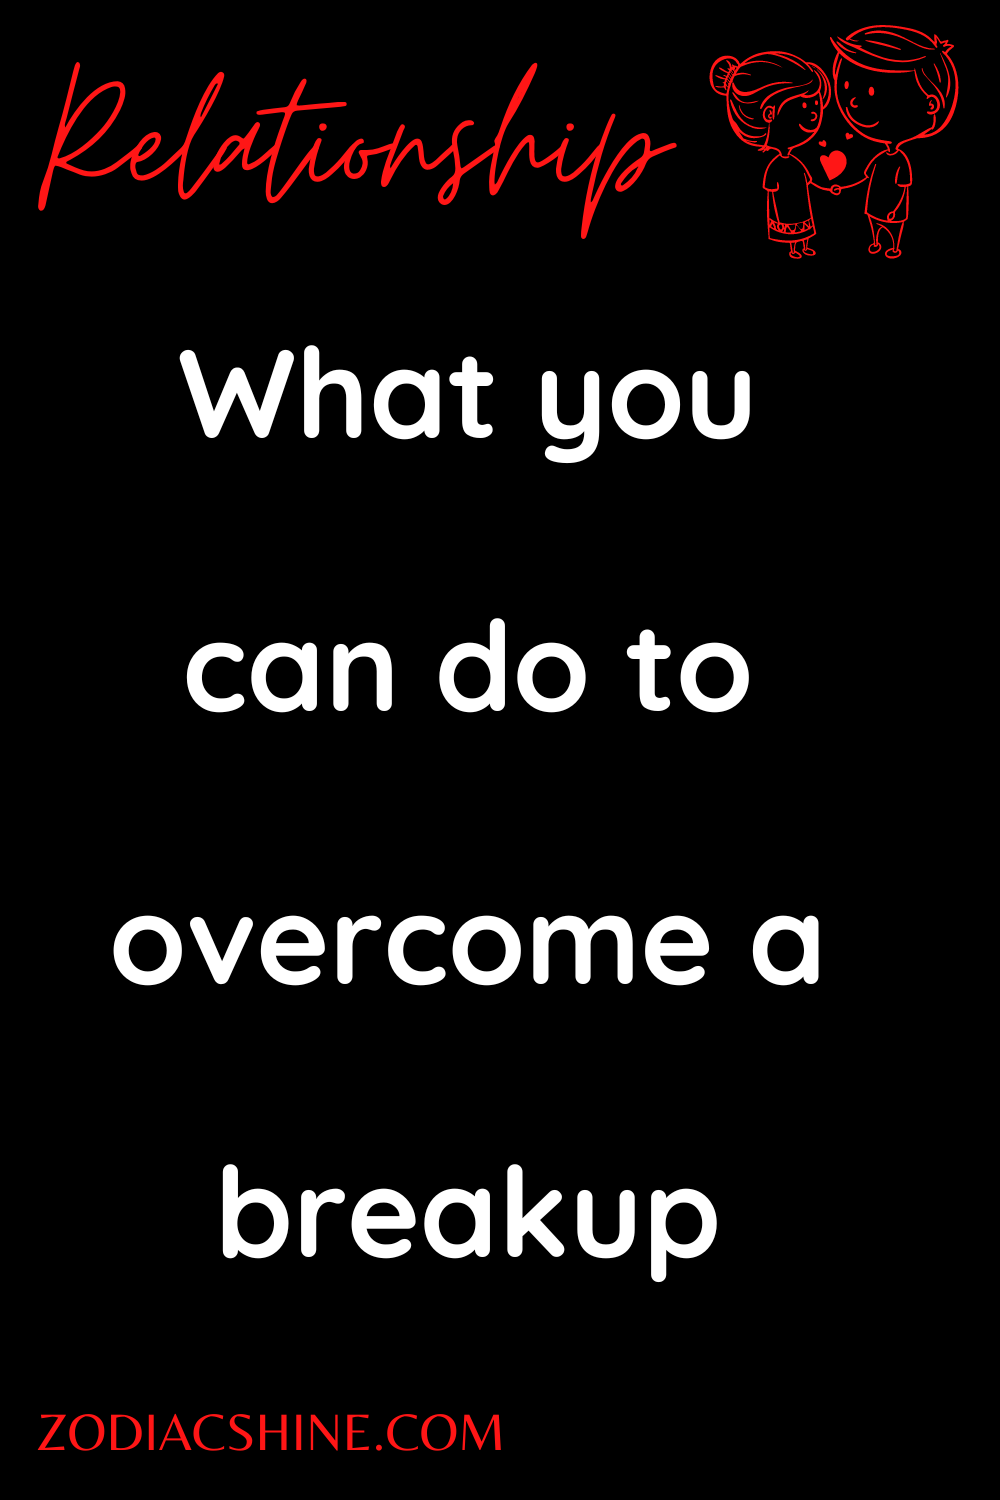 What you can do to overcome a breakup